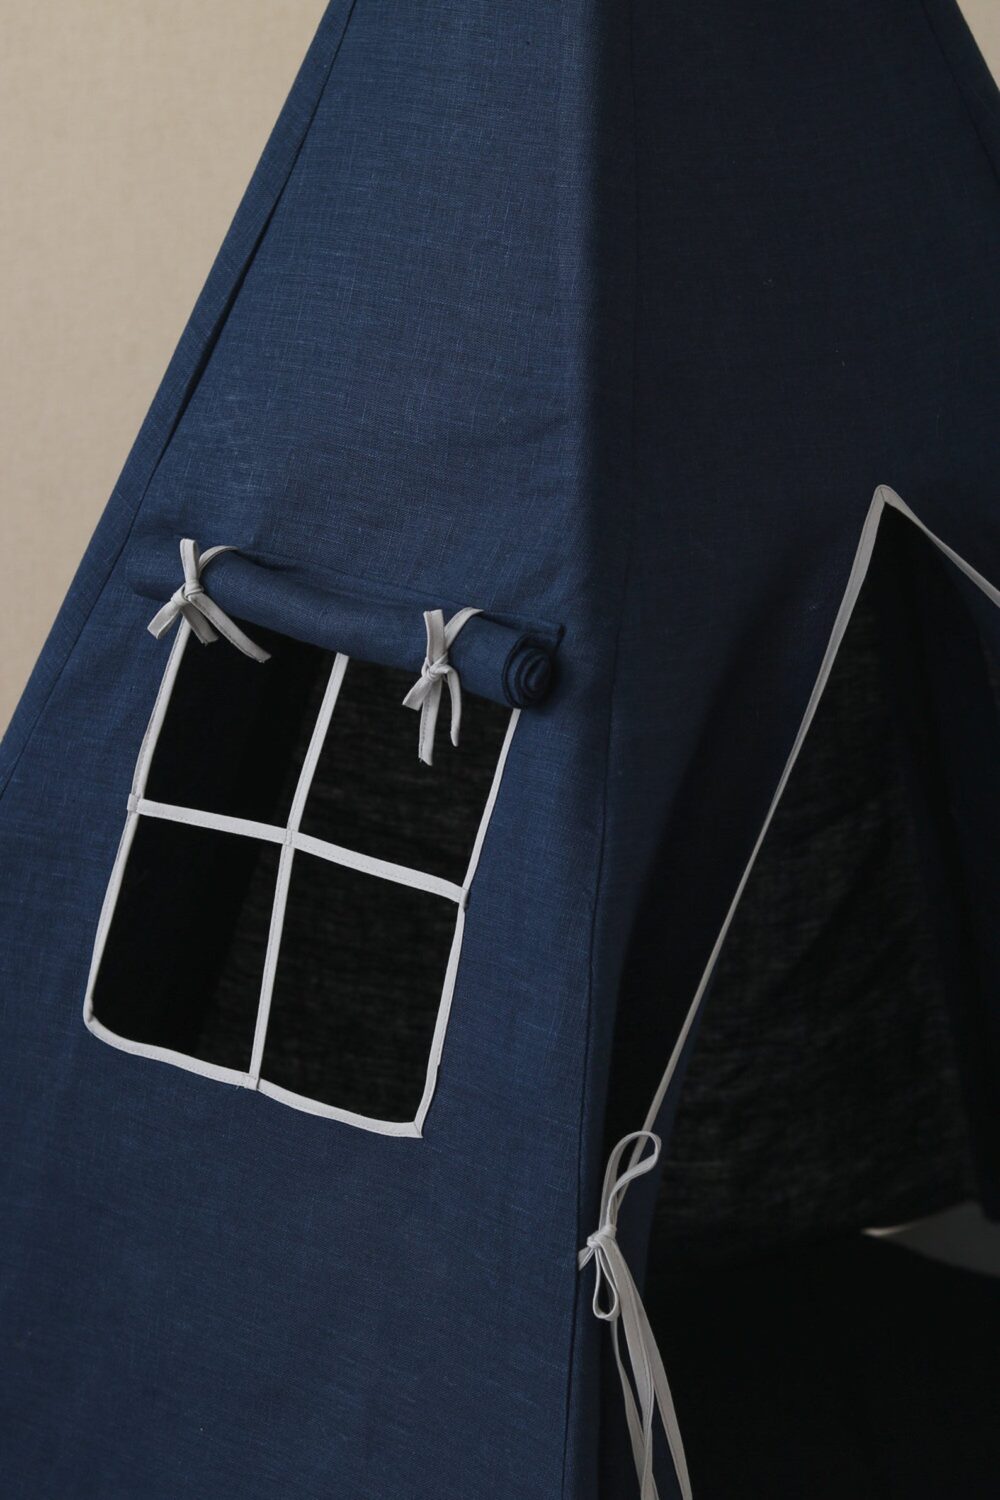 Linen tipi tent with window and playmat – navy blue